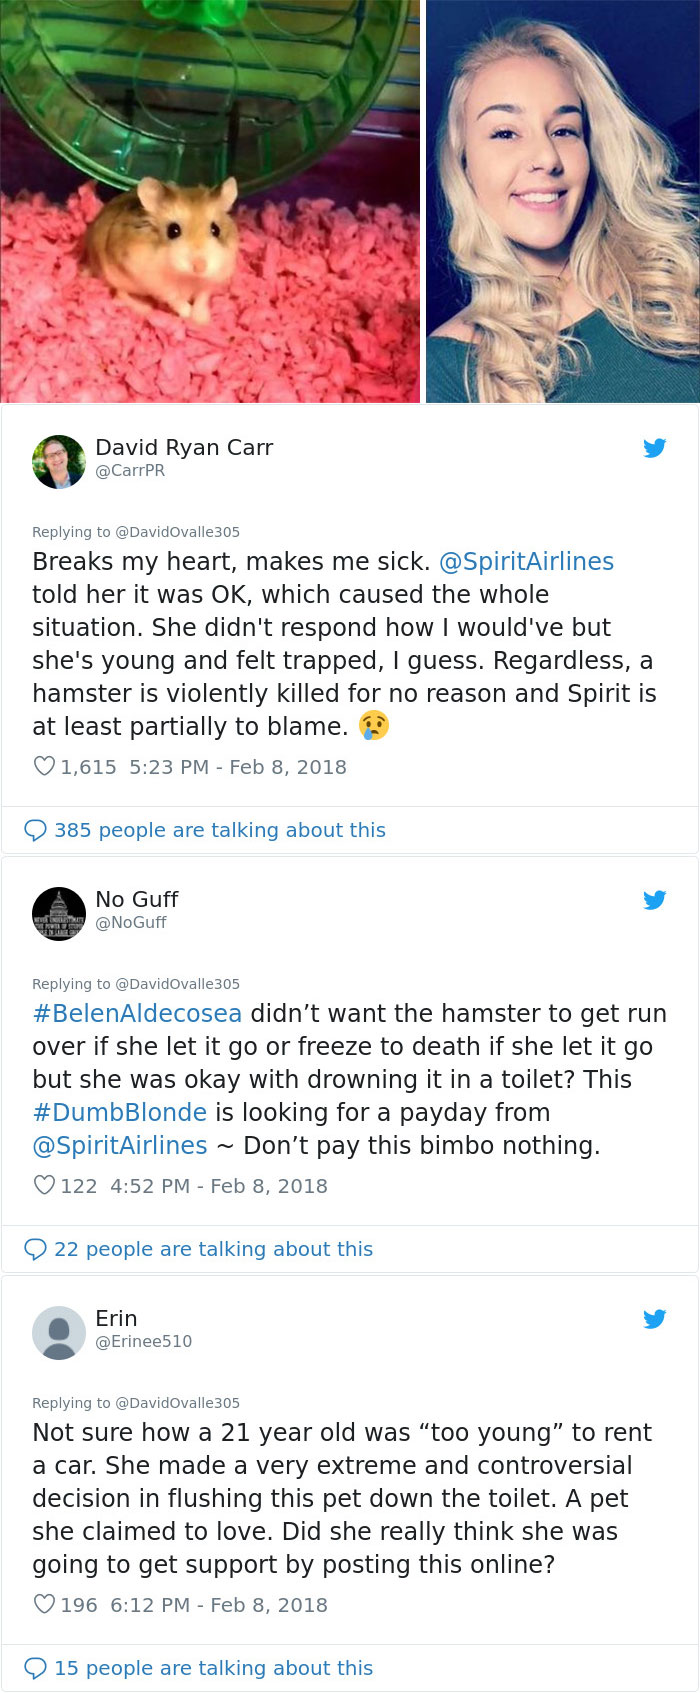 Emotional Support Hamster's Owner Claimed The Staff Working For Spirit Airlines Told Her That Pebbles Would Have To Be Flushed Down A Toilet